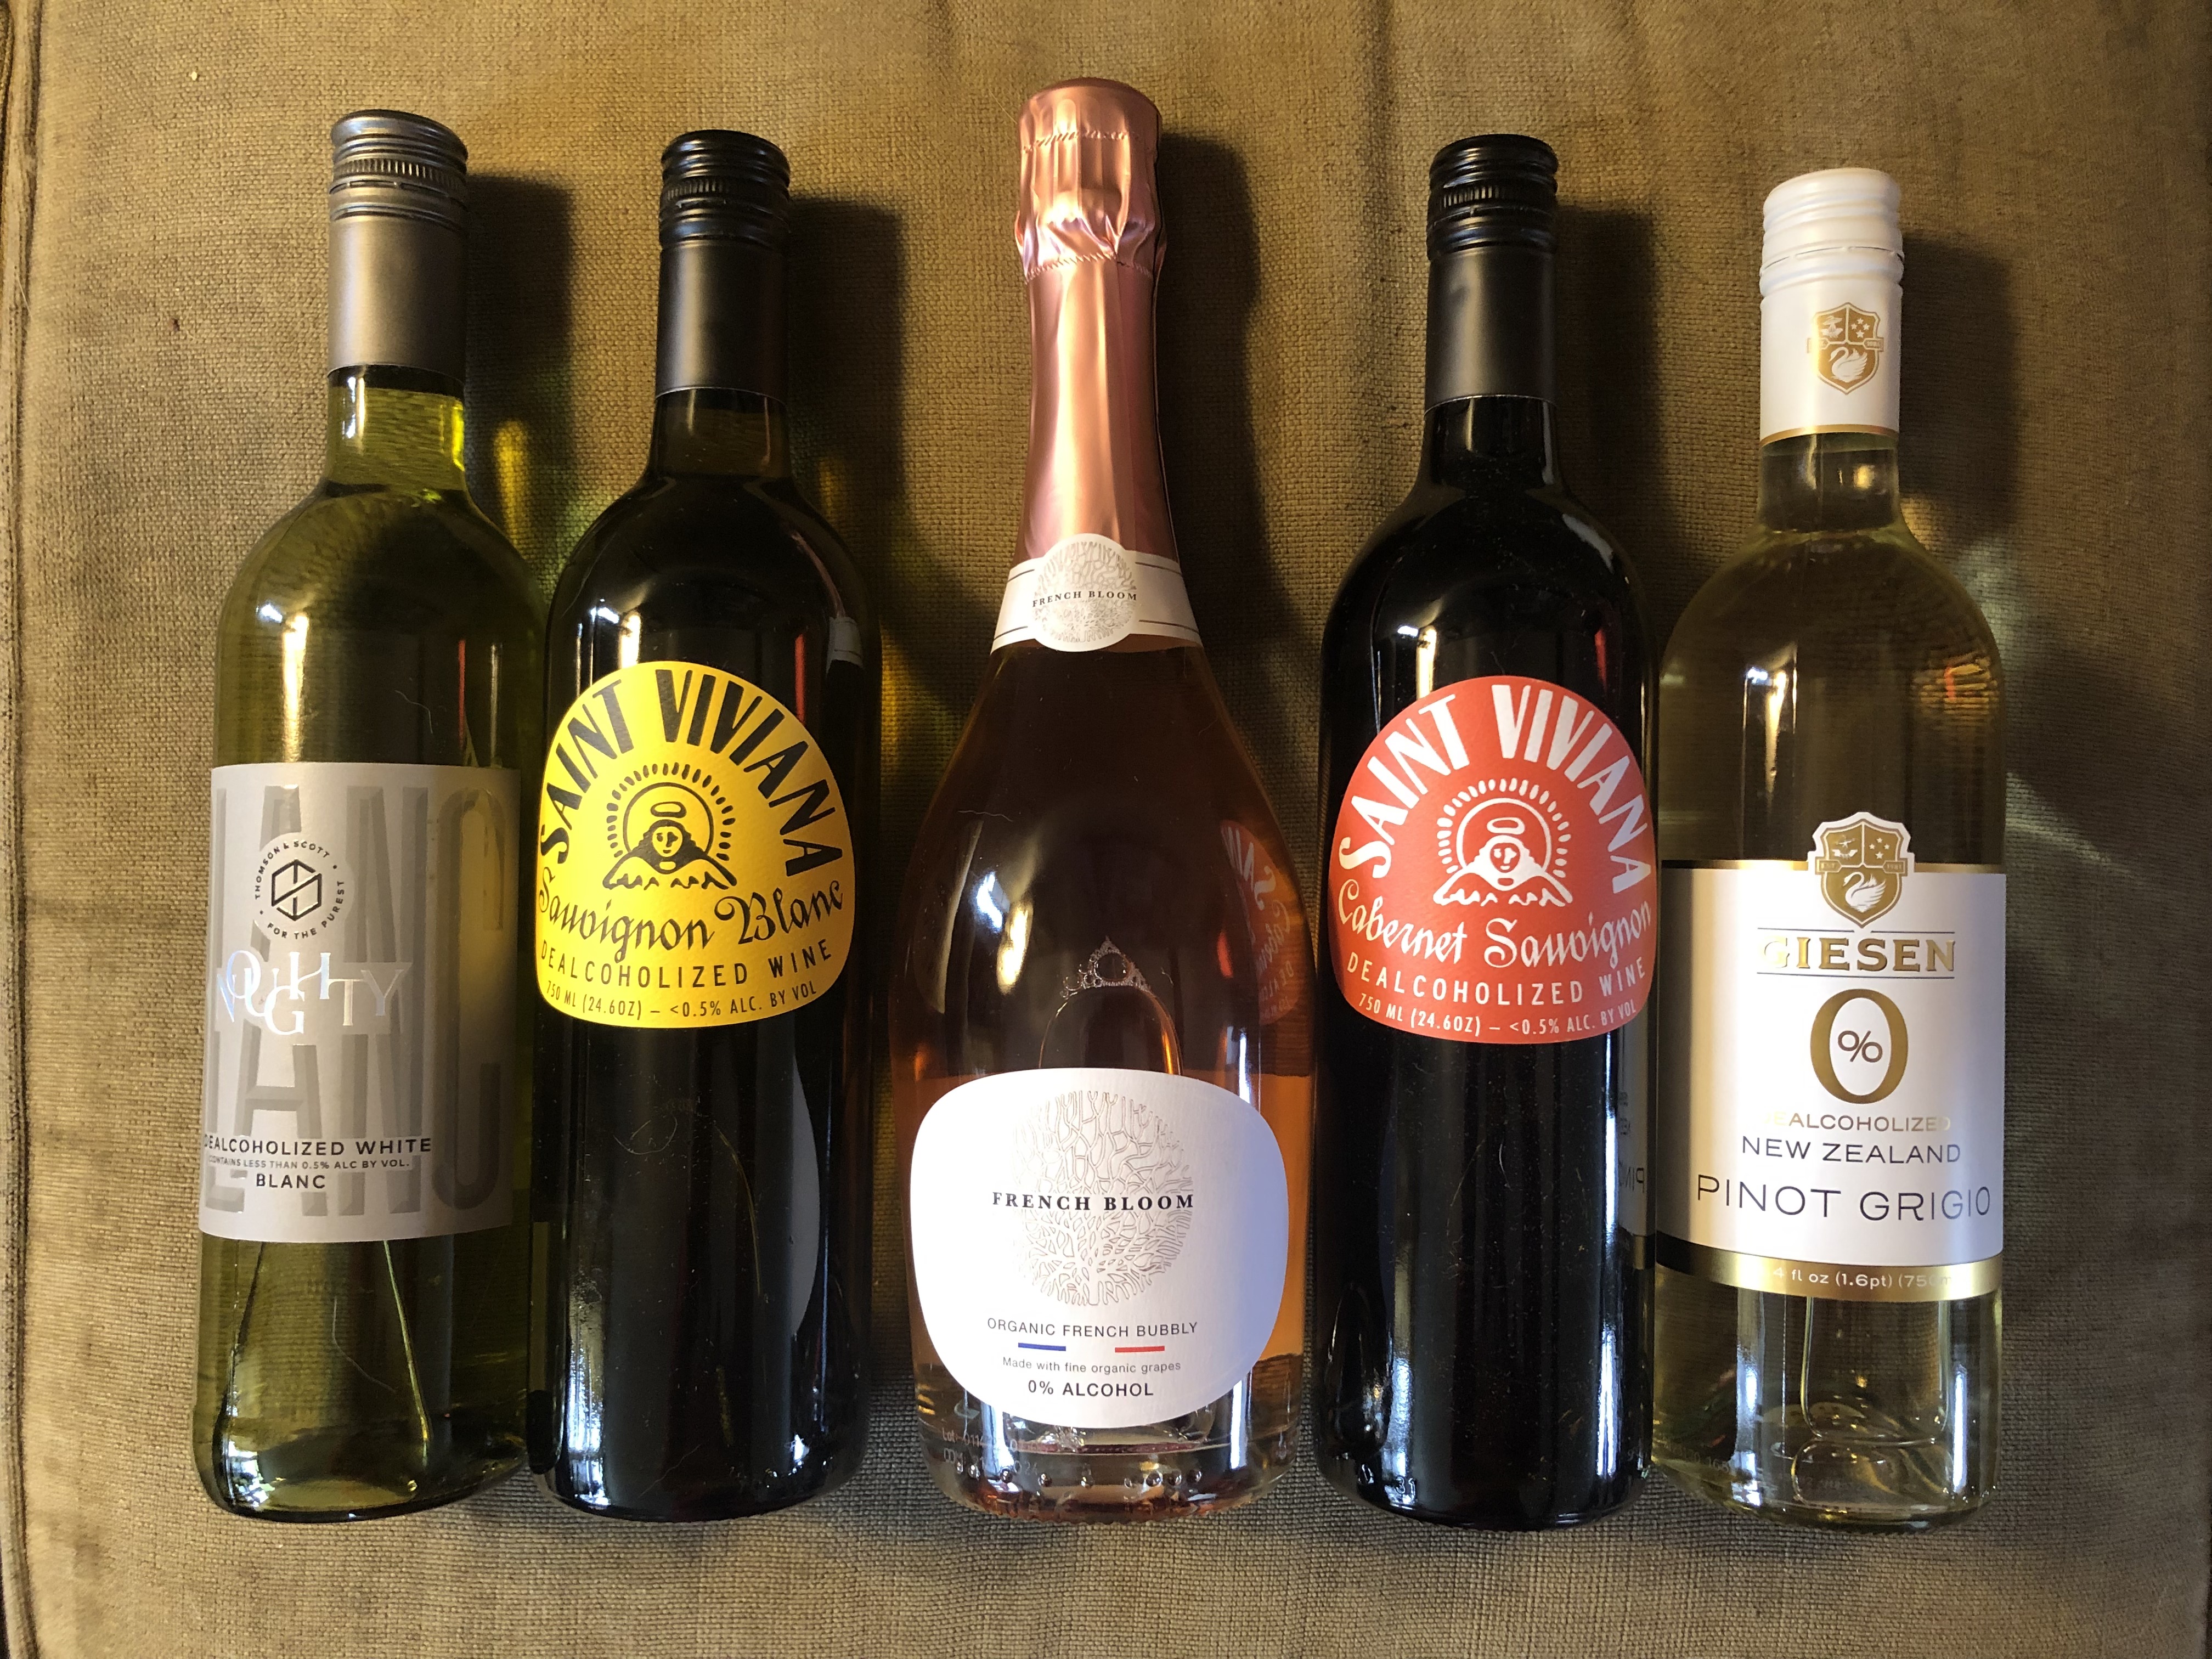 Our French Bloom collection of alcohol-free sparkling wine